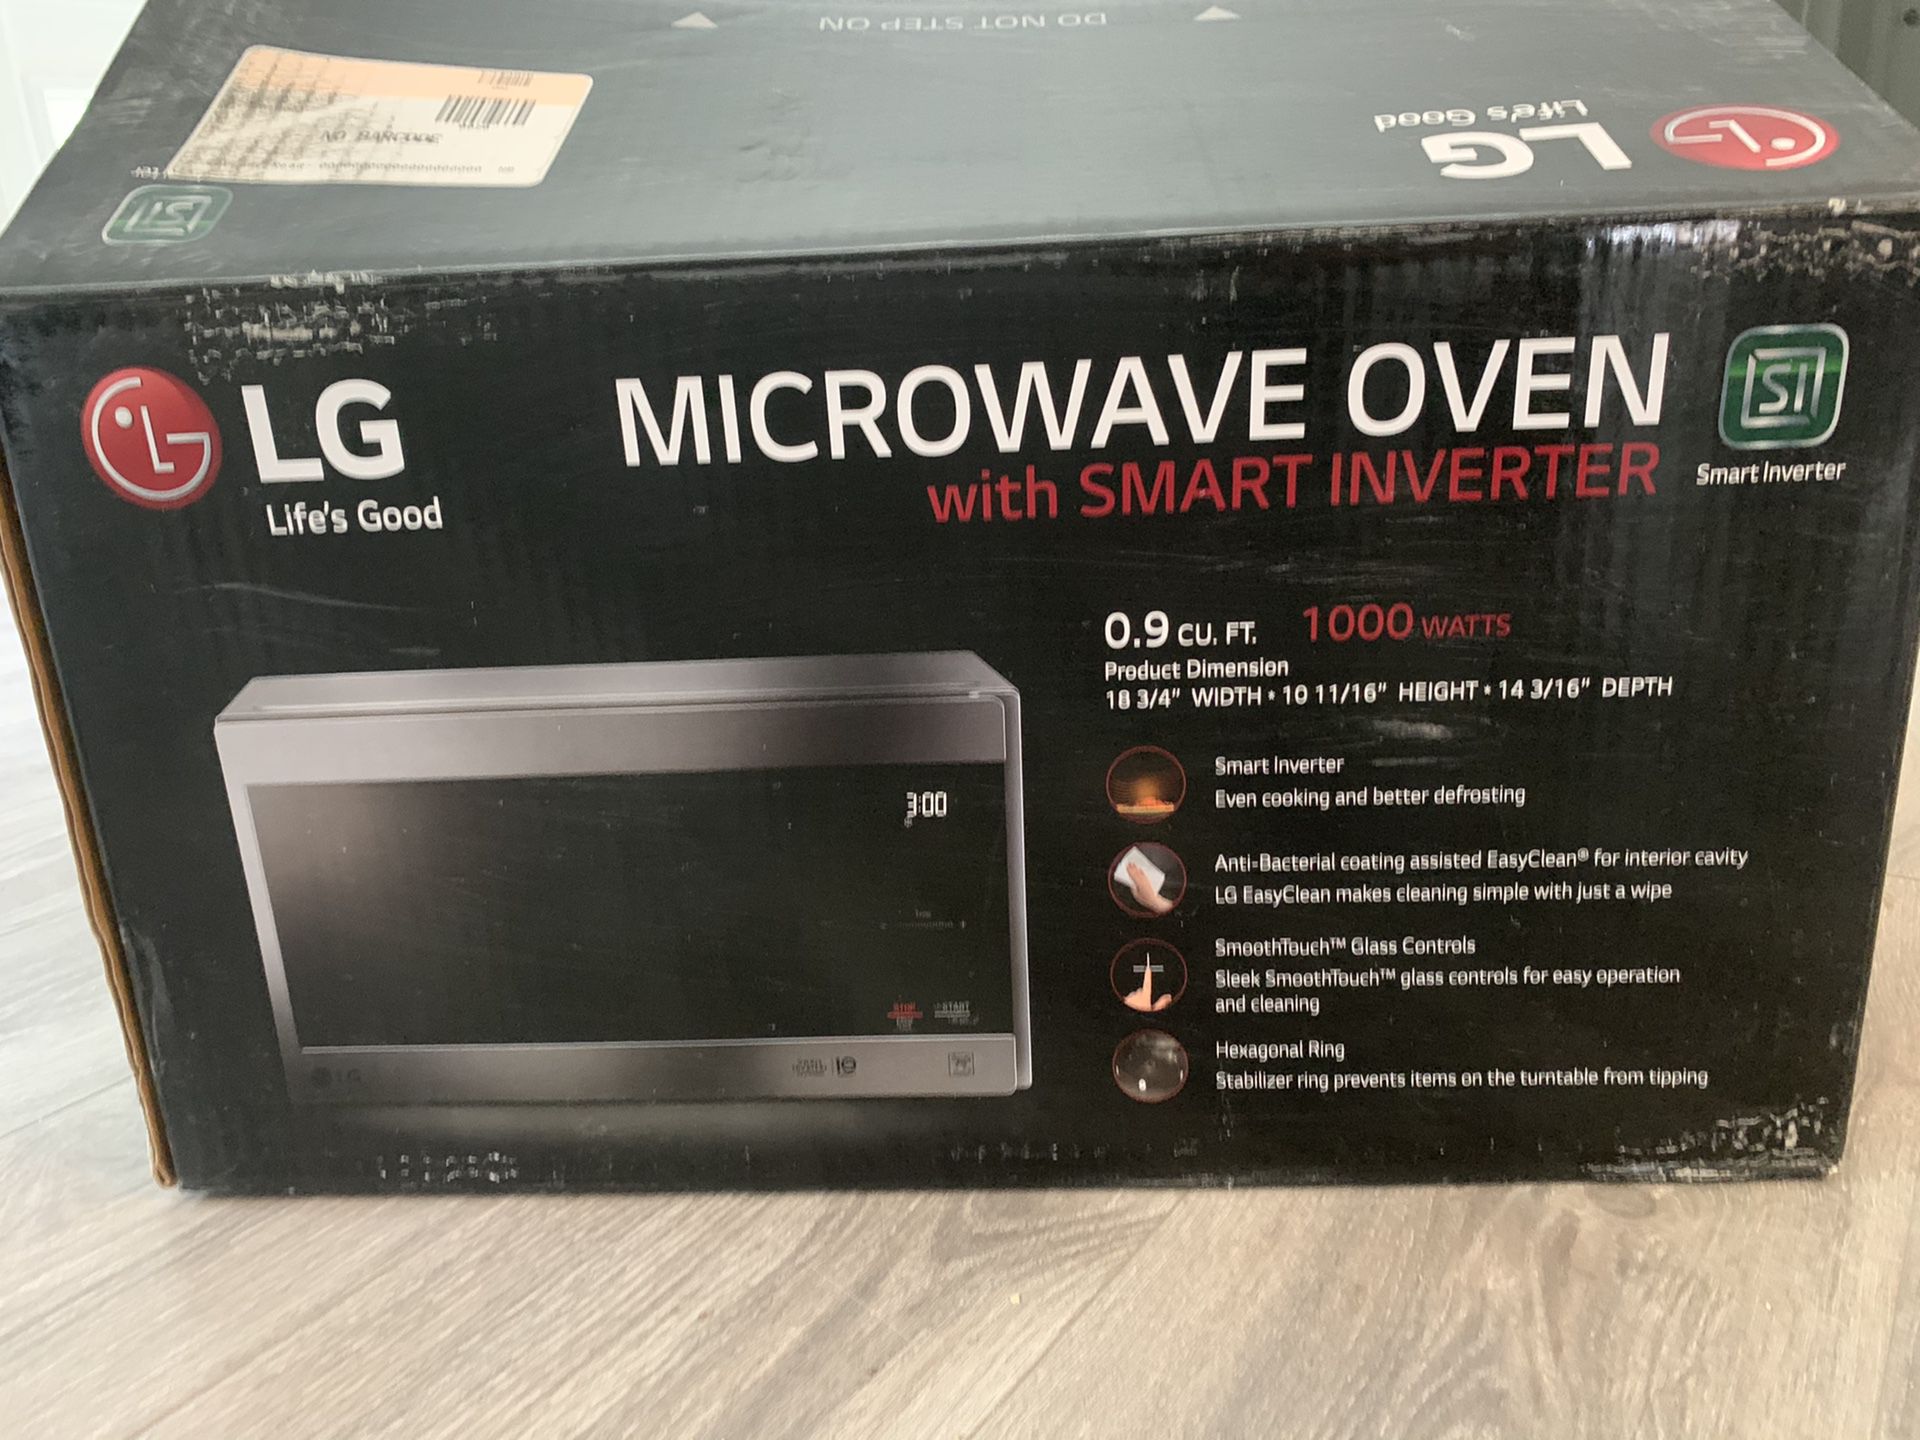 Lg microwave oven with smart inverter 1000 watts 0.9 cu ft